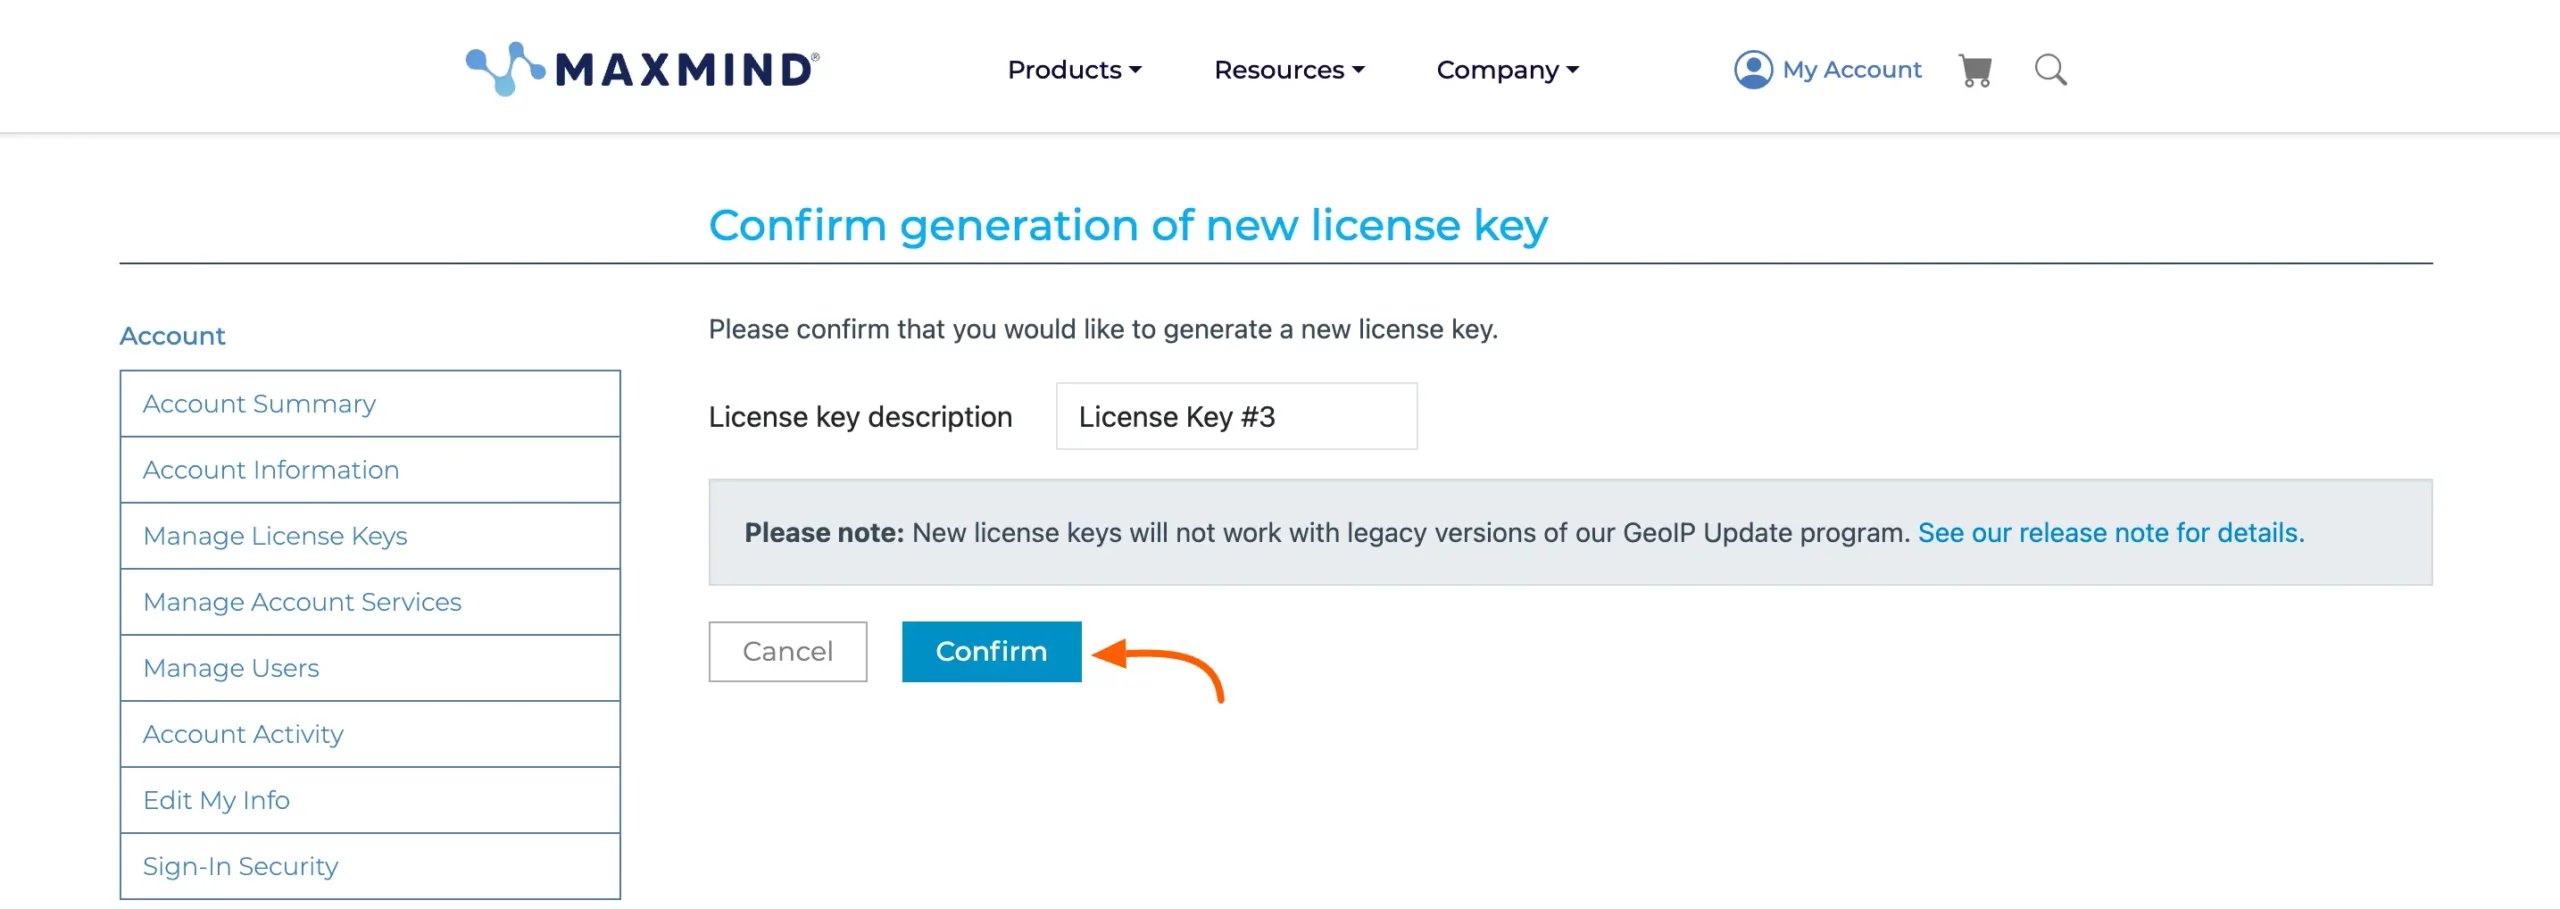 Confirm-generation-of-new-license-key-in-MaxMind